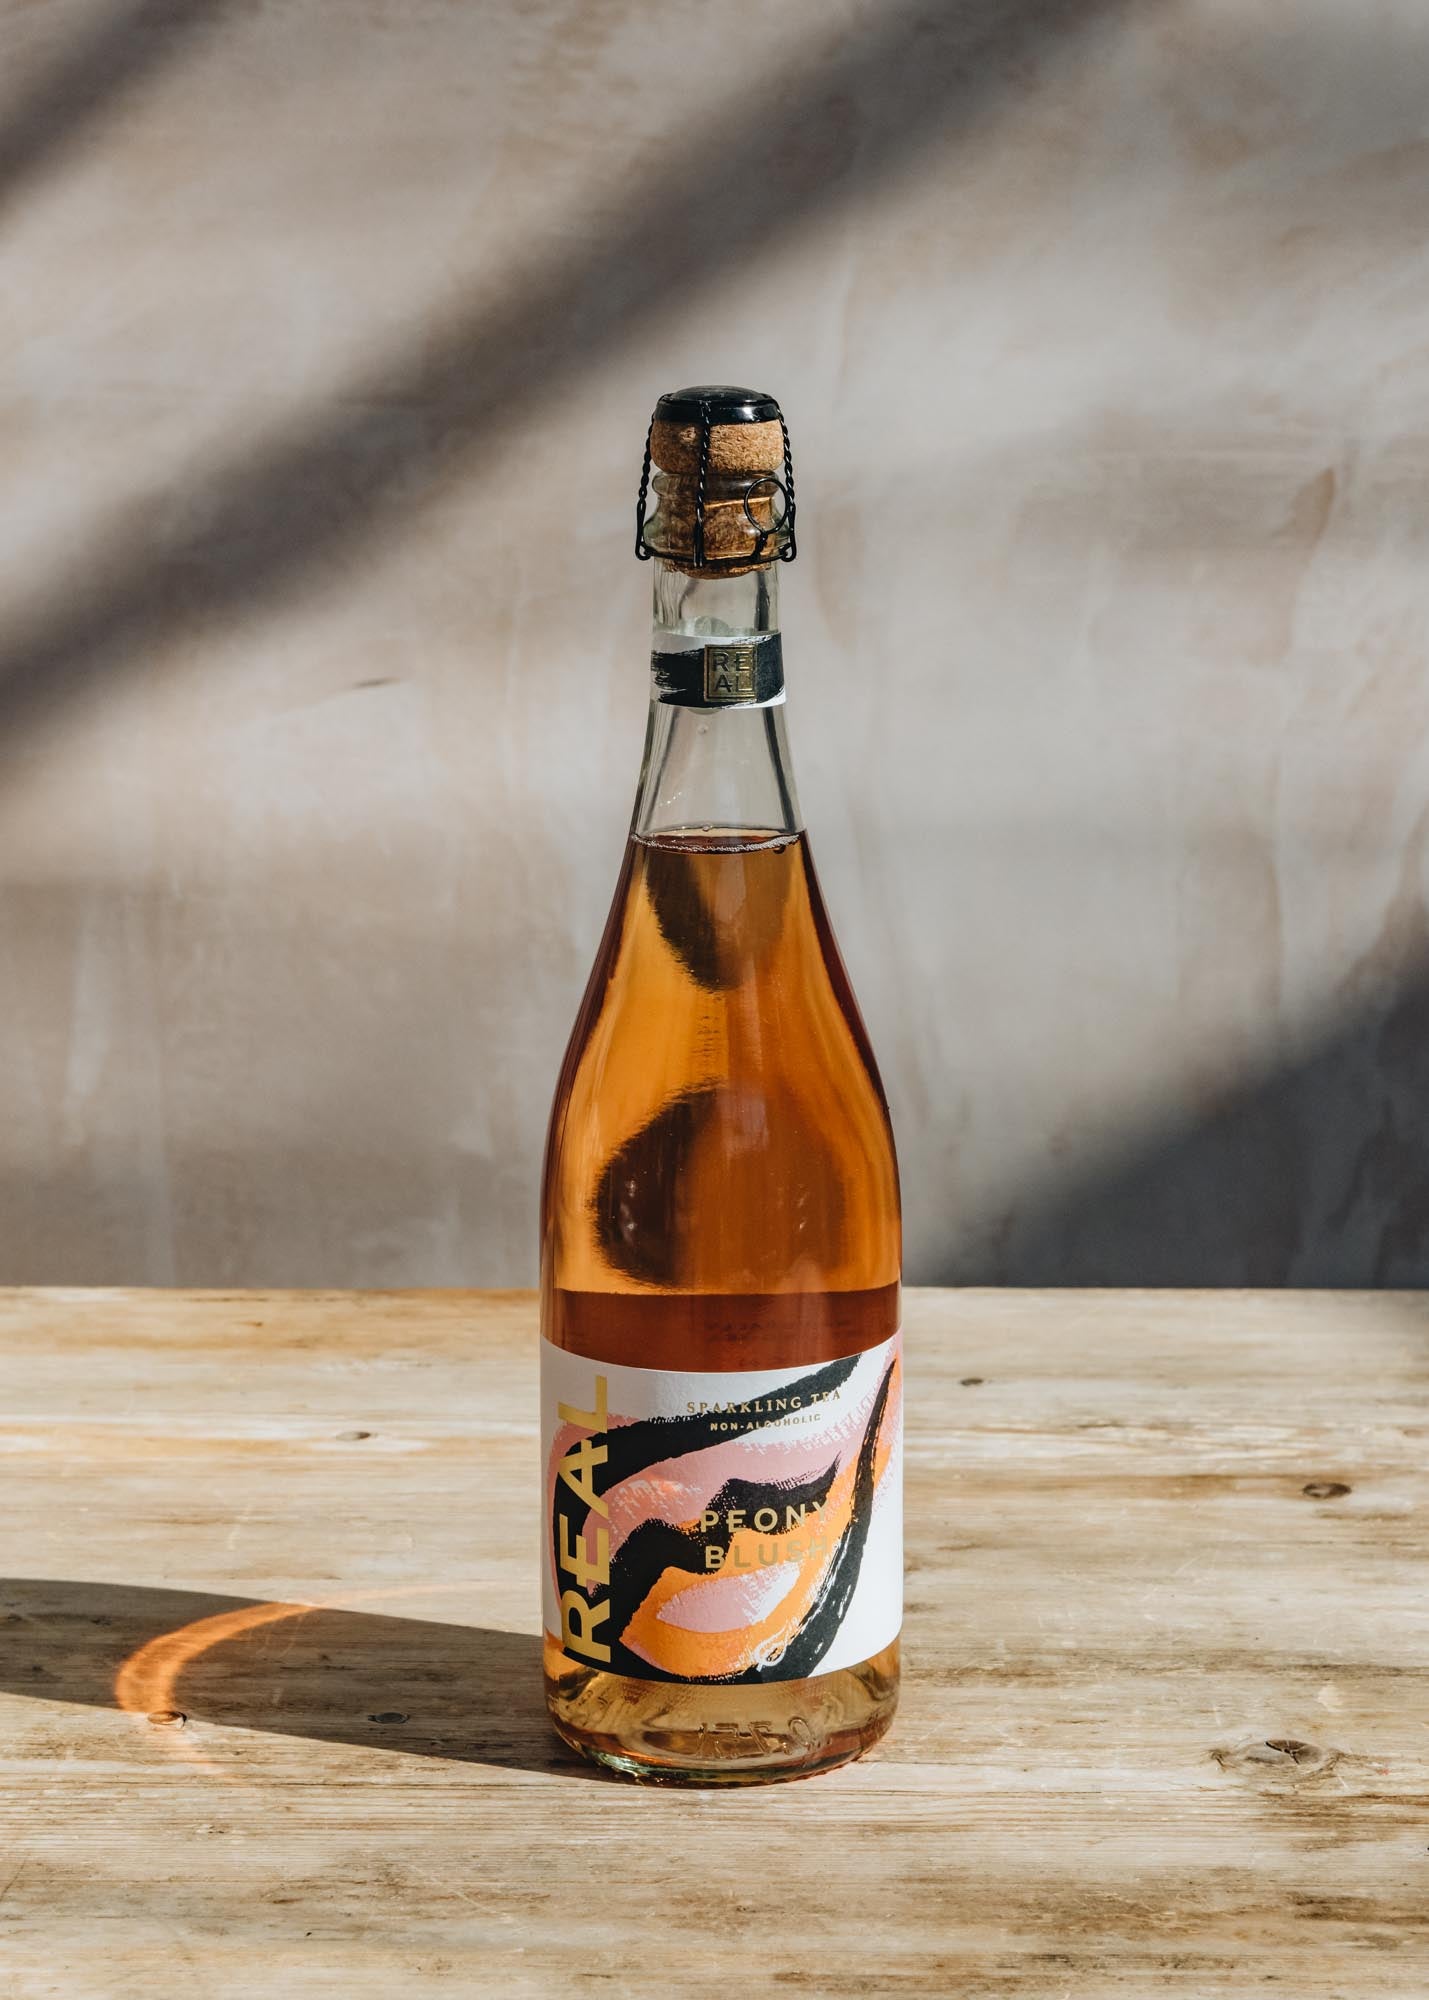 The REAL Drinks Co. Peony Blush Sparkling Fermented Tea